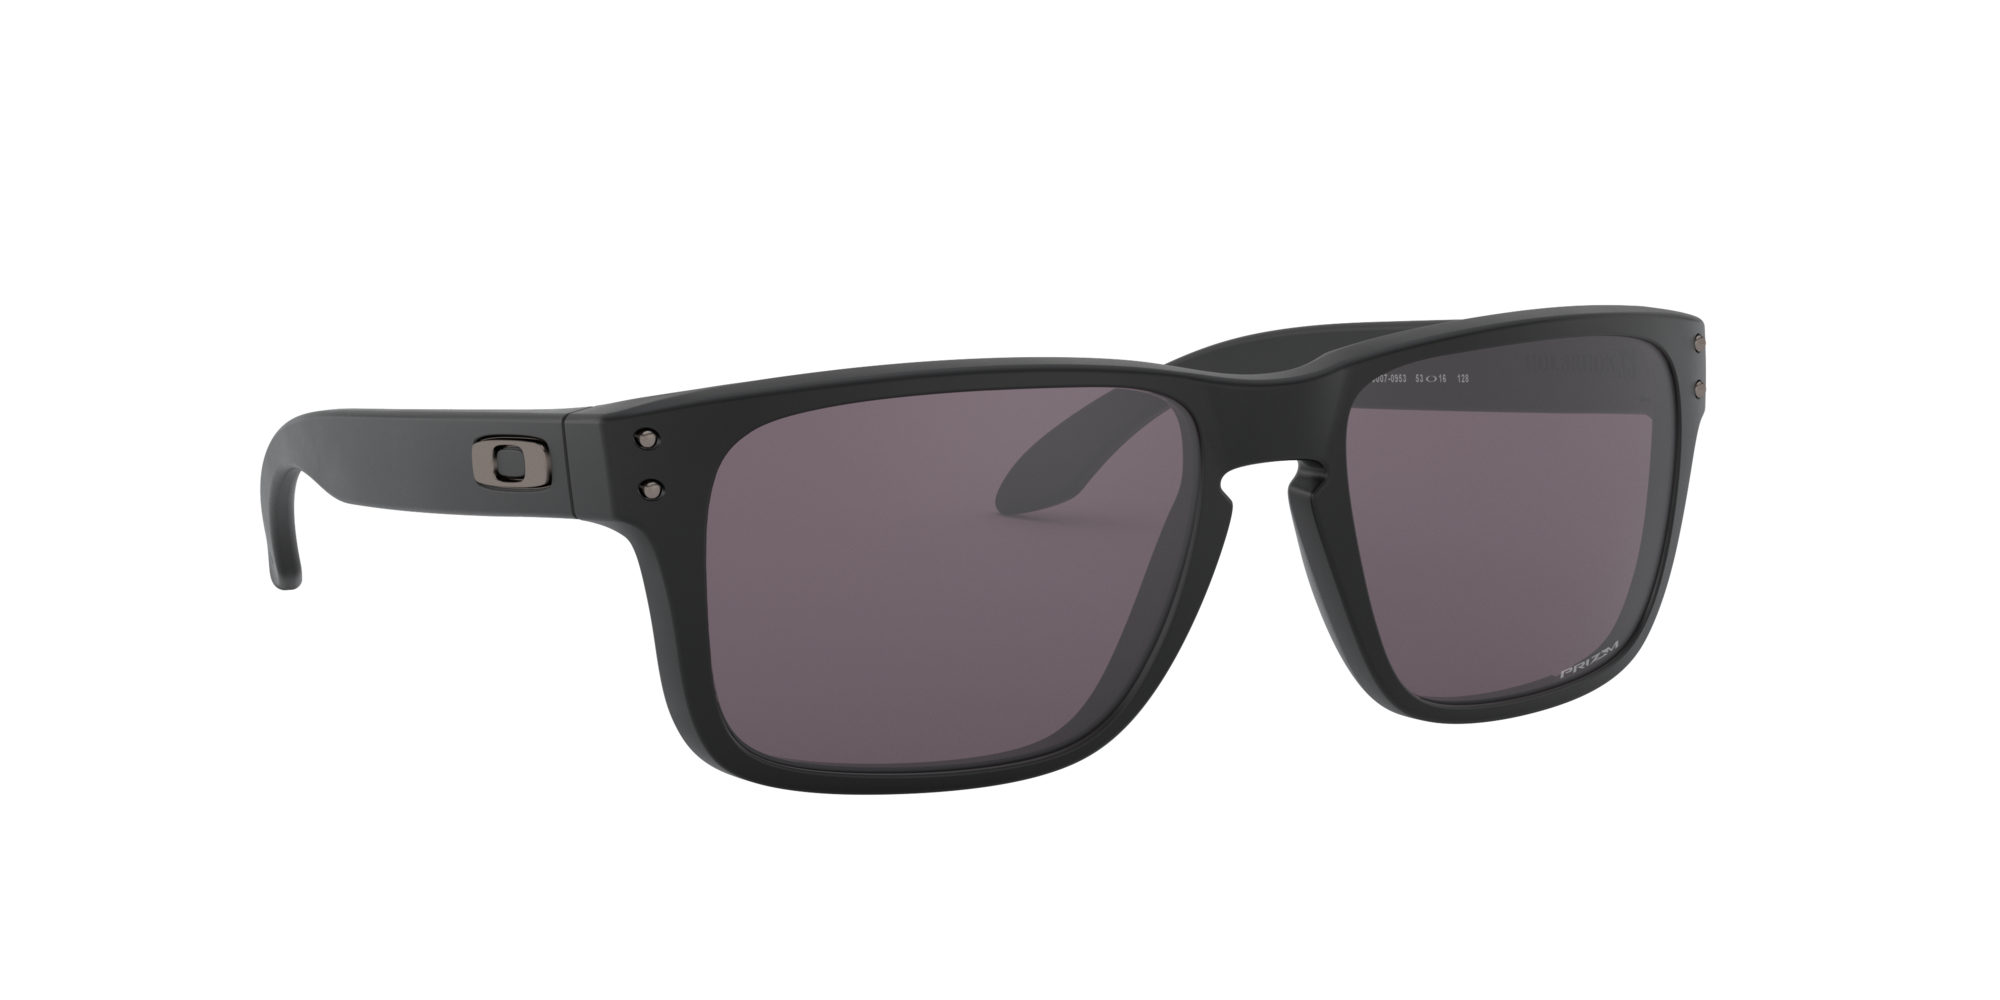 [products.image.angle_right01] OAKLEY OJ9007 900709